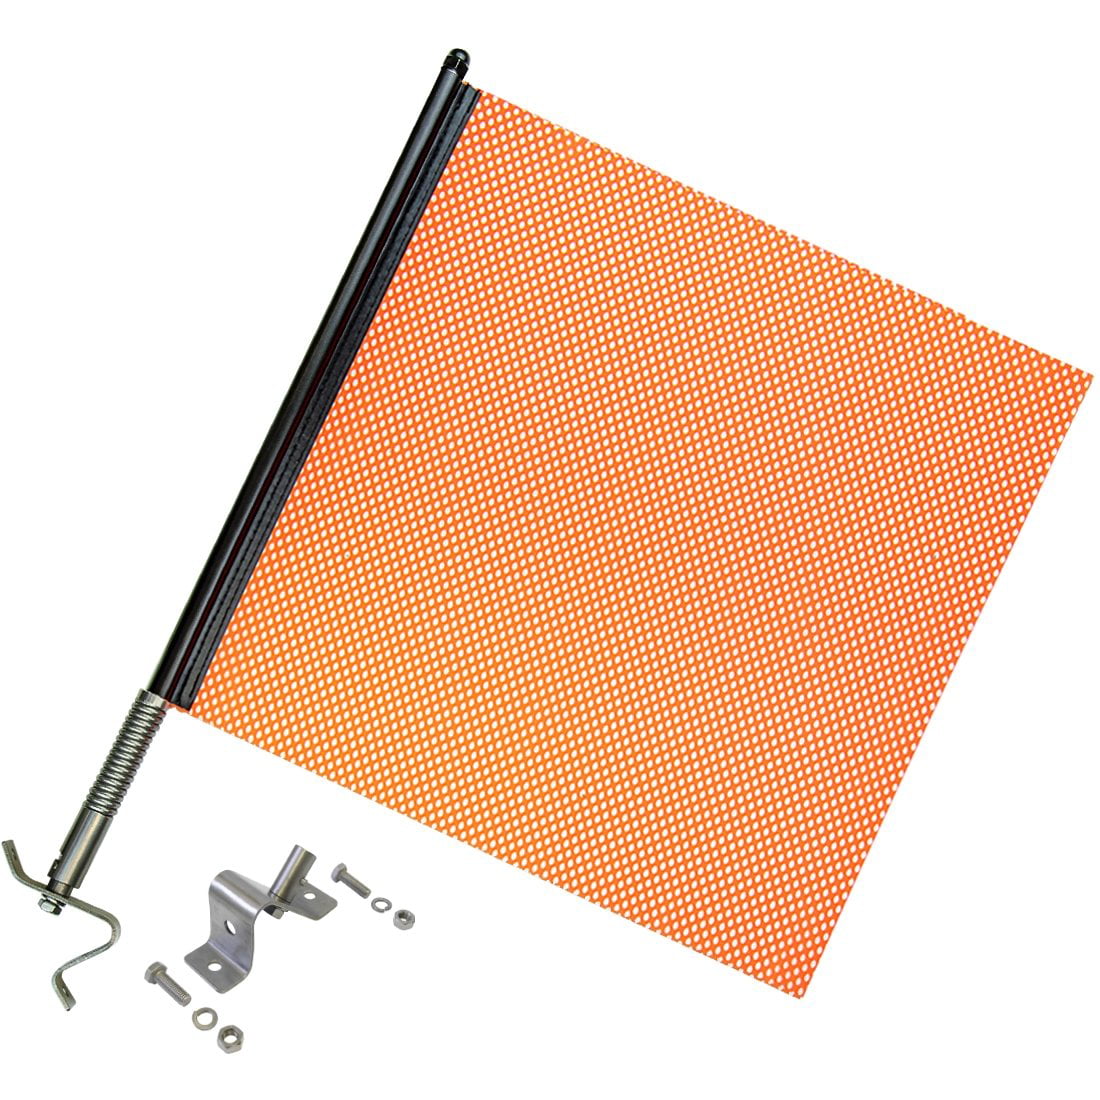 Photo 1 of VULCAN Heavy Duty Spring Warning Flag Kit with Universal Mounting Bracket - Mesh Construction - 18 Inch